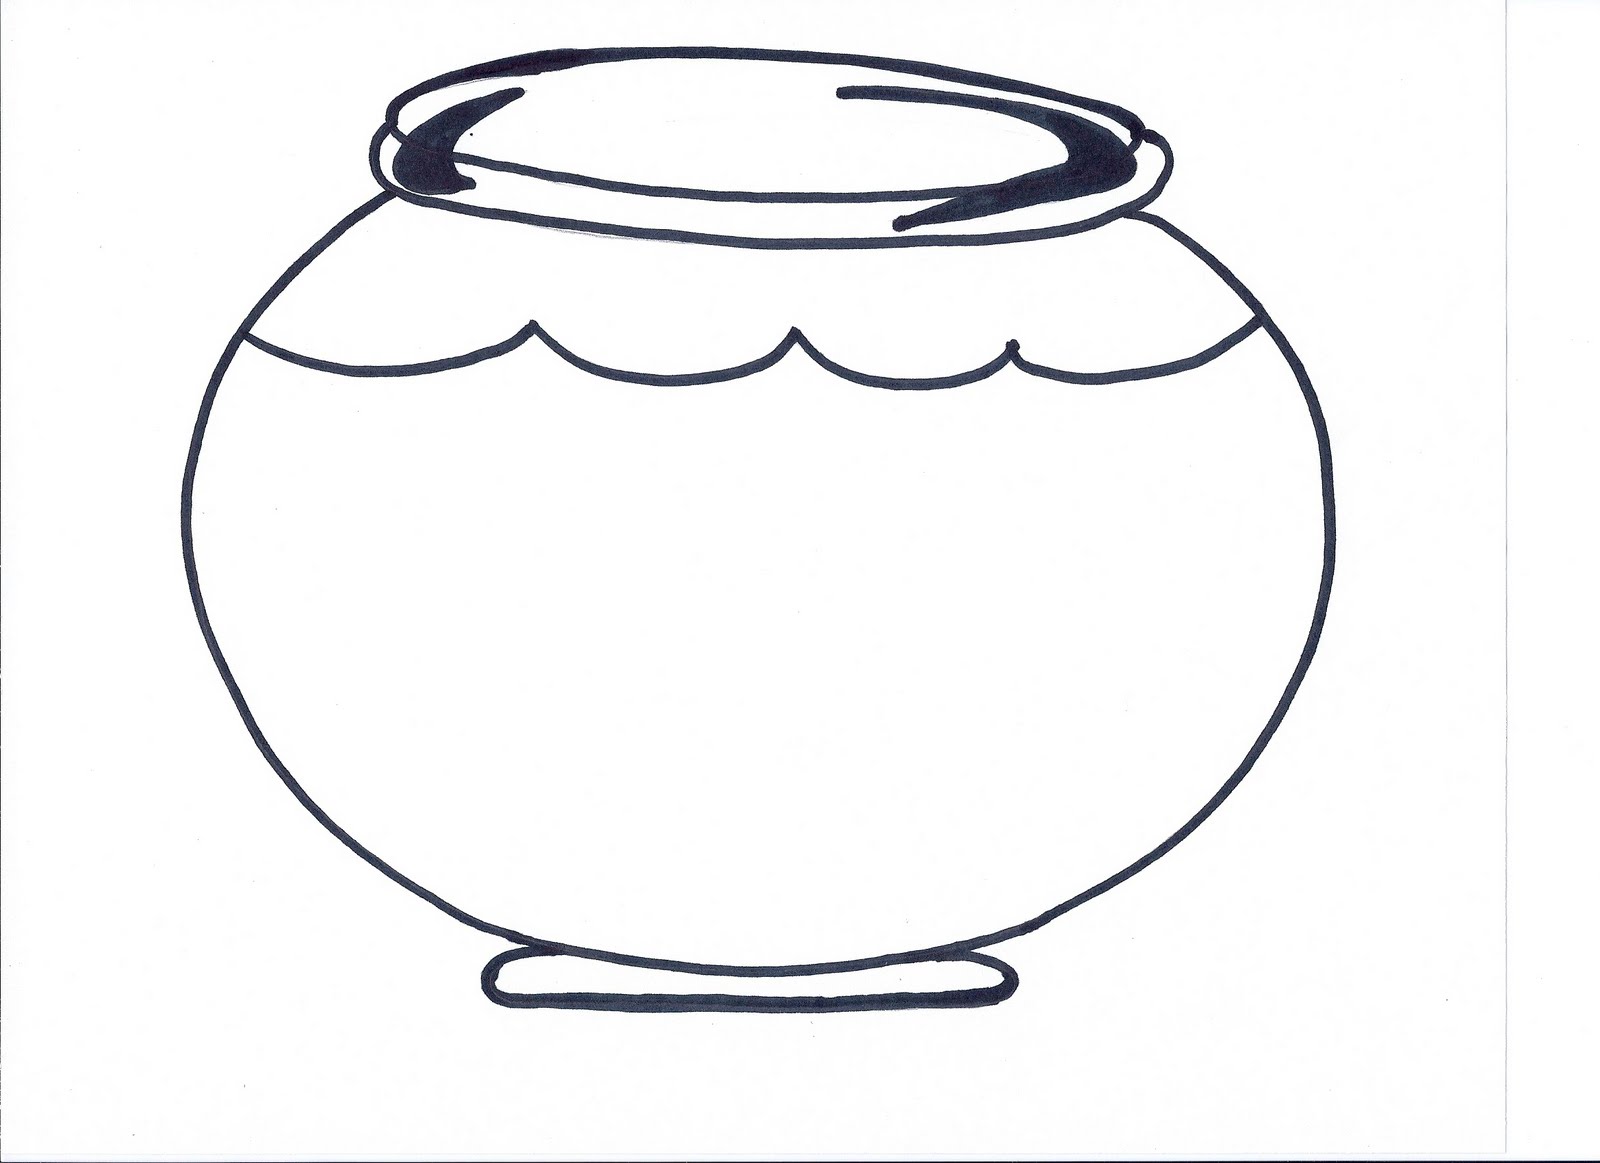 Fish Bowl Template Cliparts.co